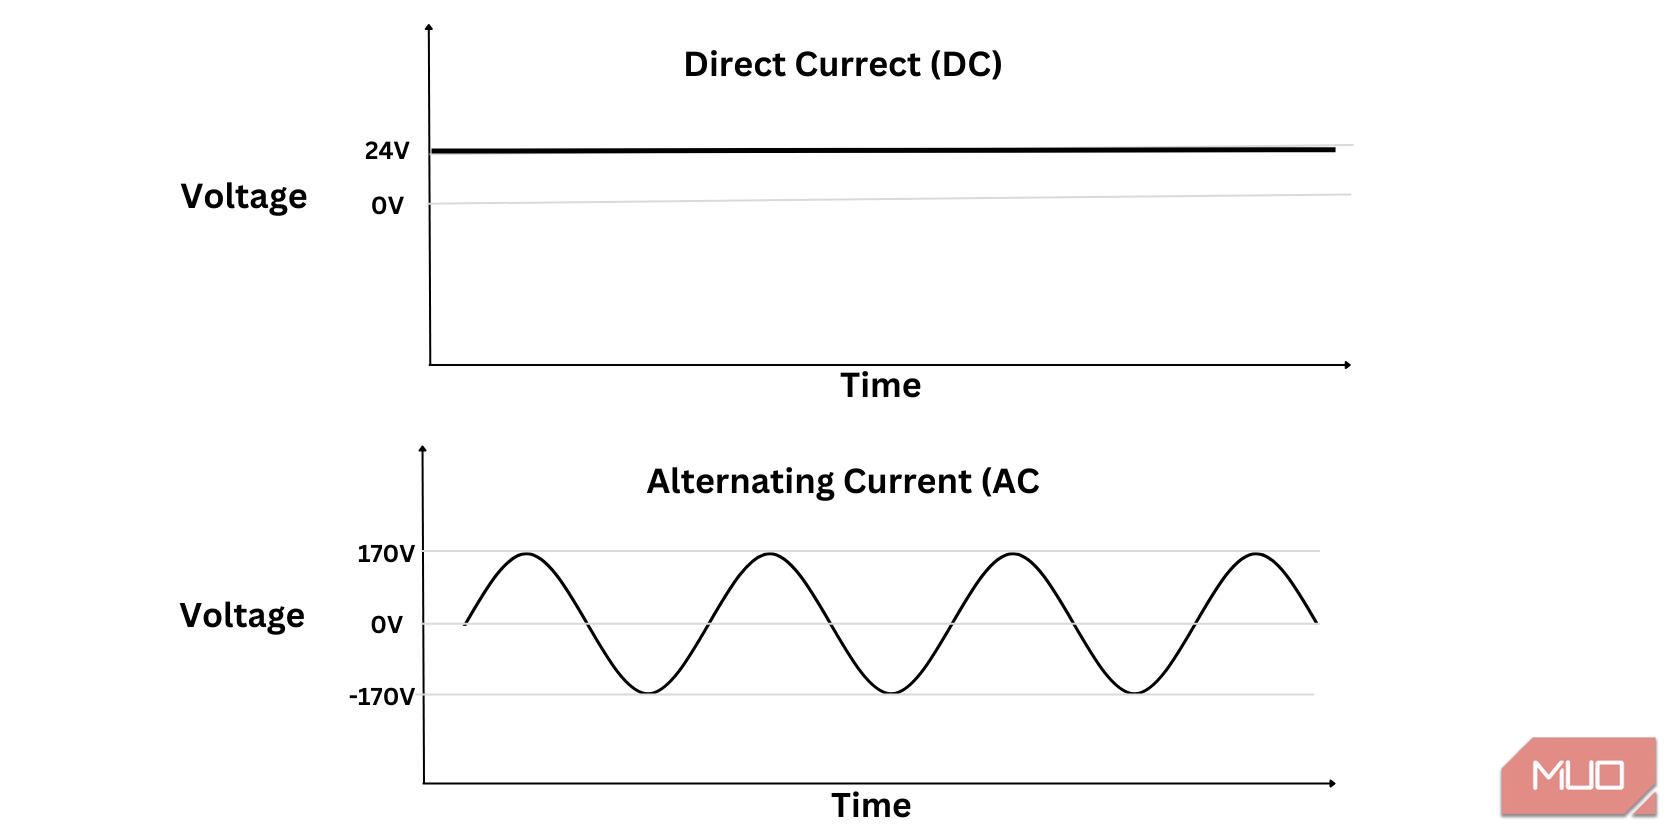 AC and DC signals